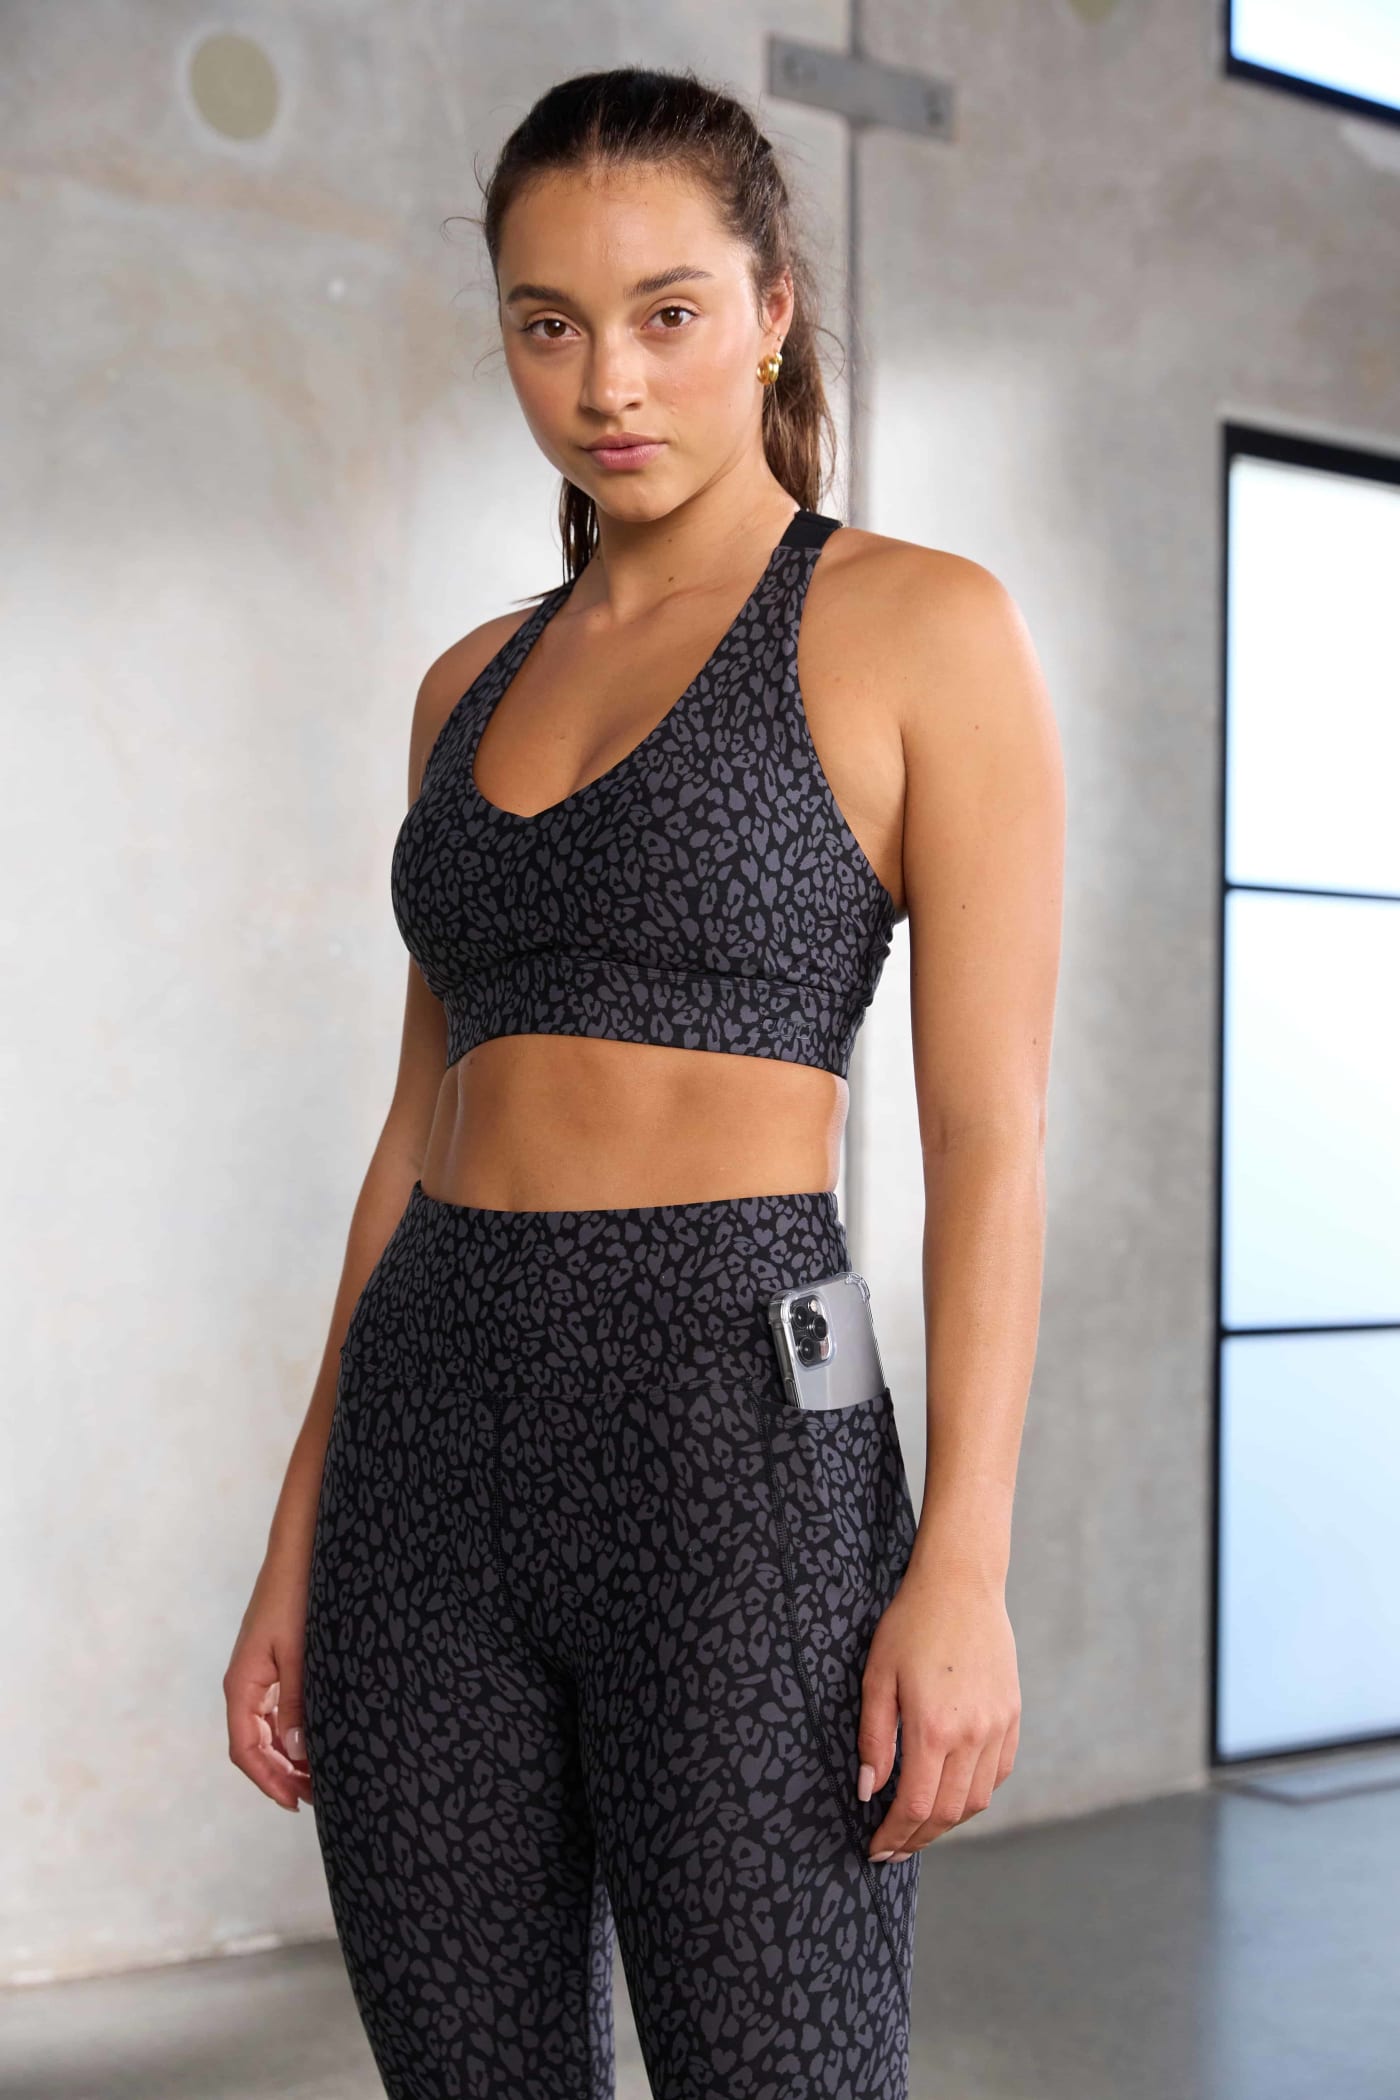 Front shot of a model wearing an animal print sports bra and leggings with a phone pocket on the side of the leg.